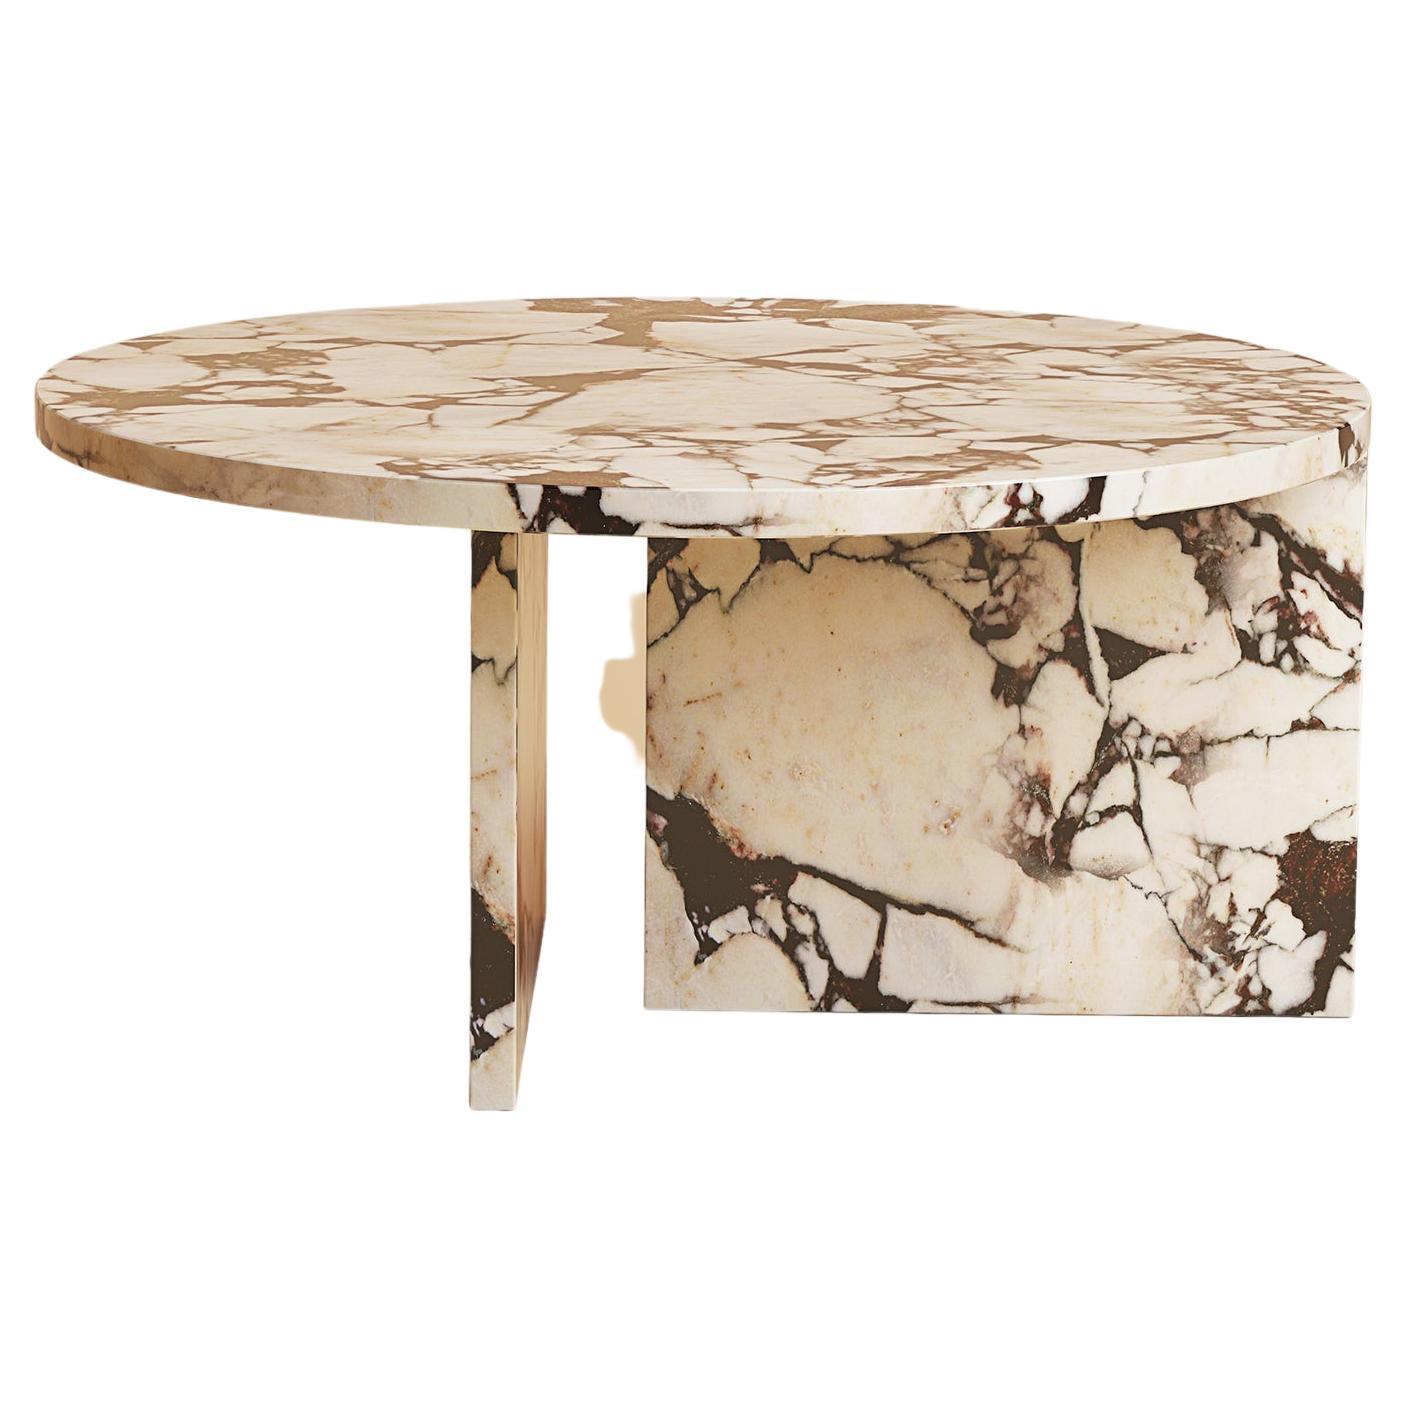 Calacatta Violet Marble Round Coffee Table, Made in Italy